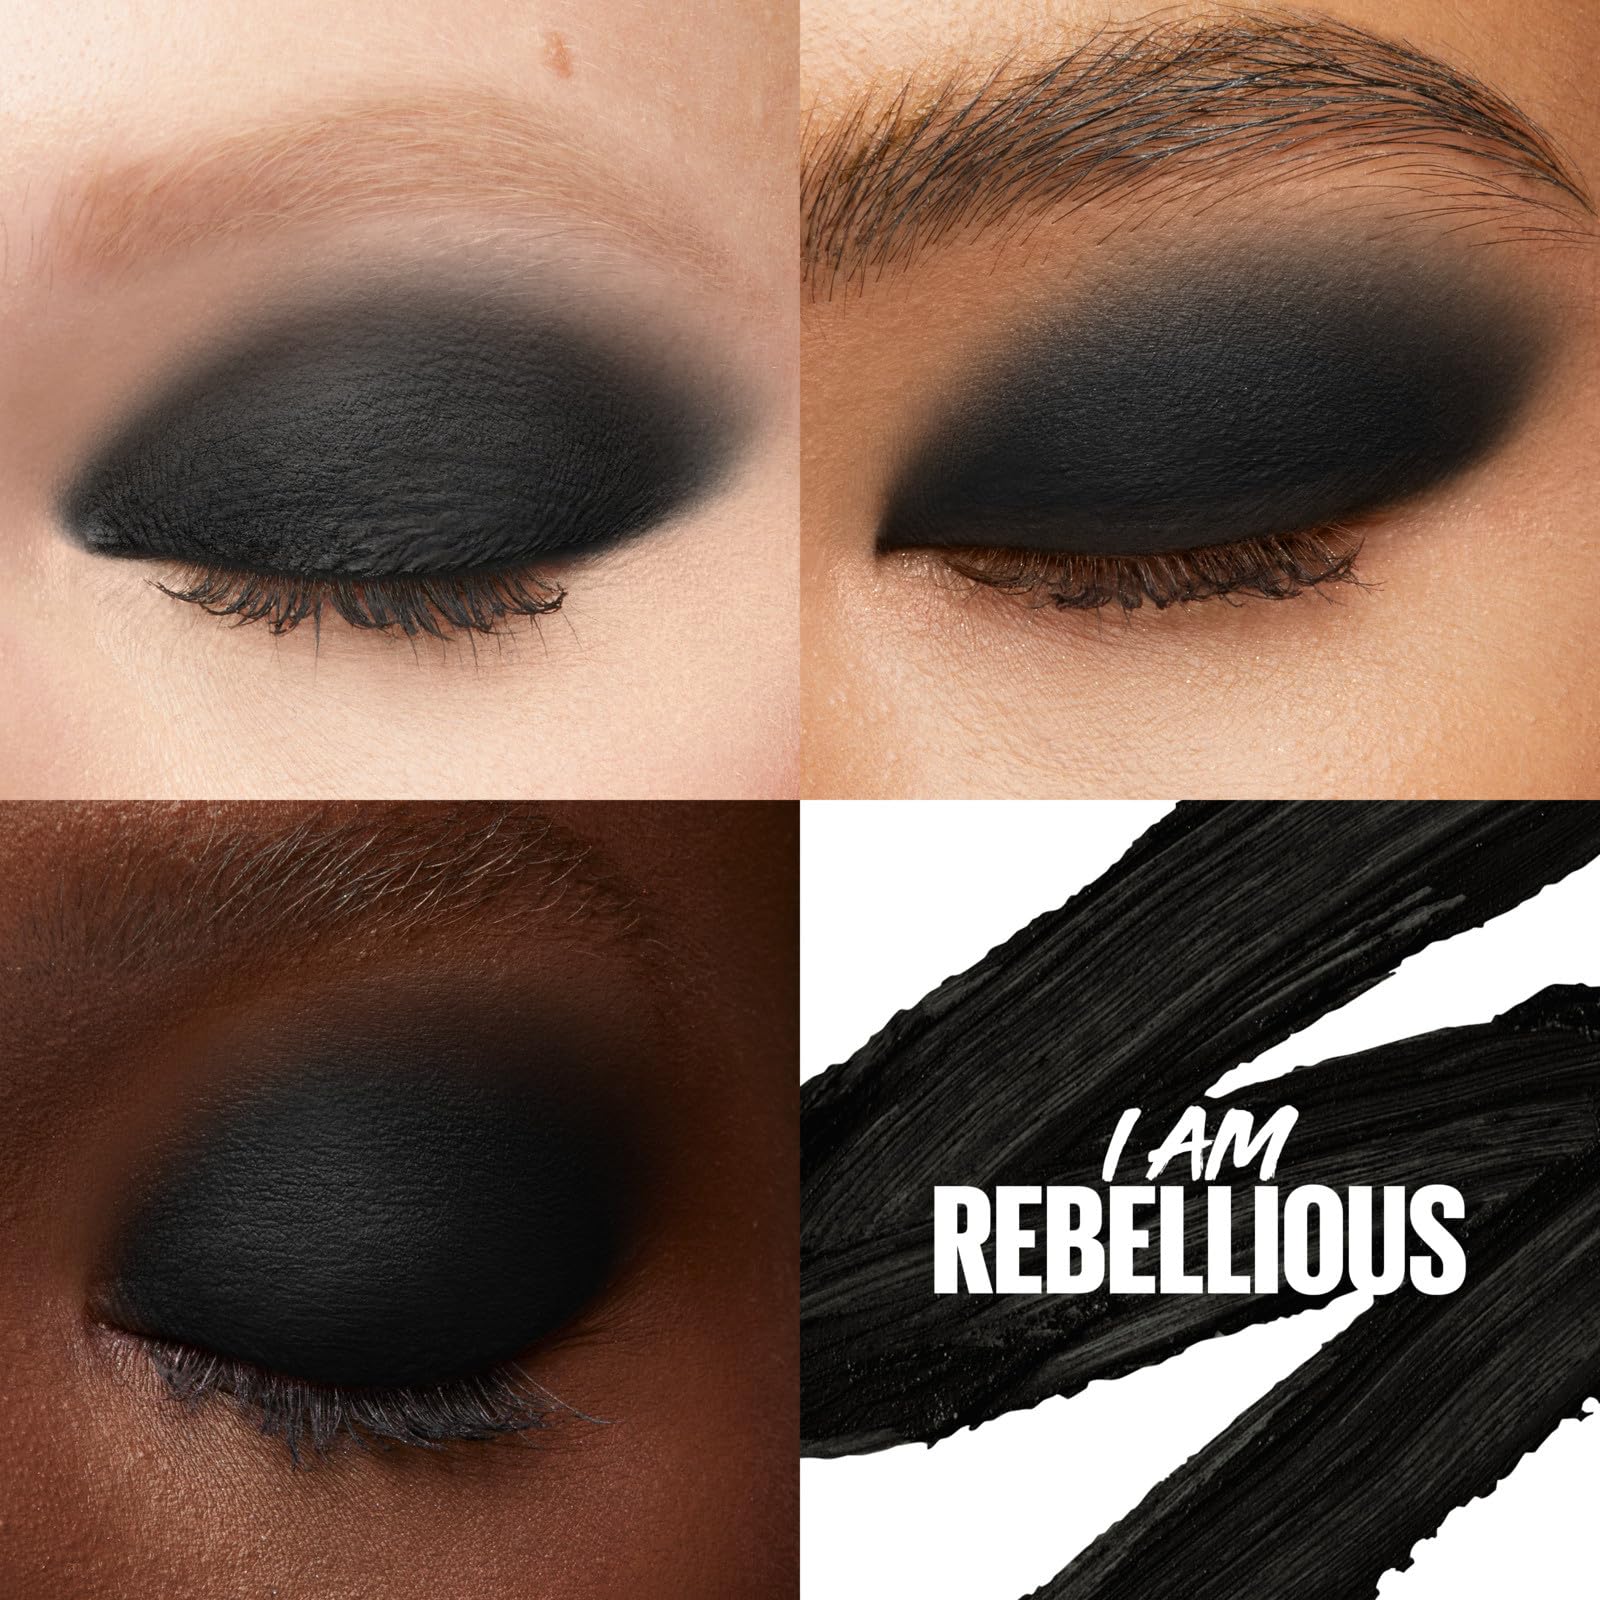 MAYBELLINE Color Tattoo Longwear Multi-Use Eye Shadow Stix, All-In-One Eye Makeup for Up to 24HR Wear, I am Rebellious (Matte Black), 1 Count